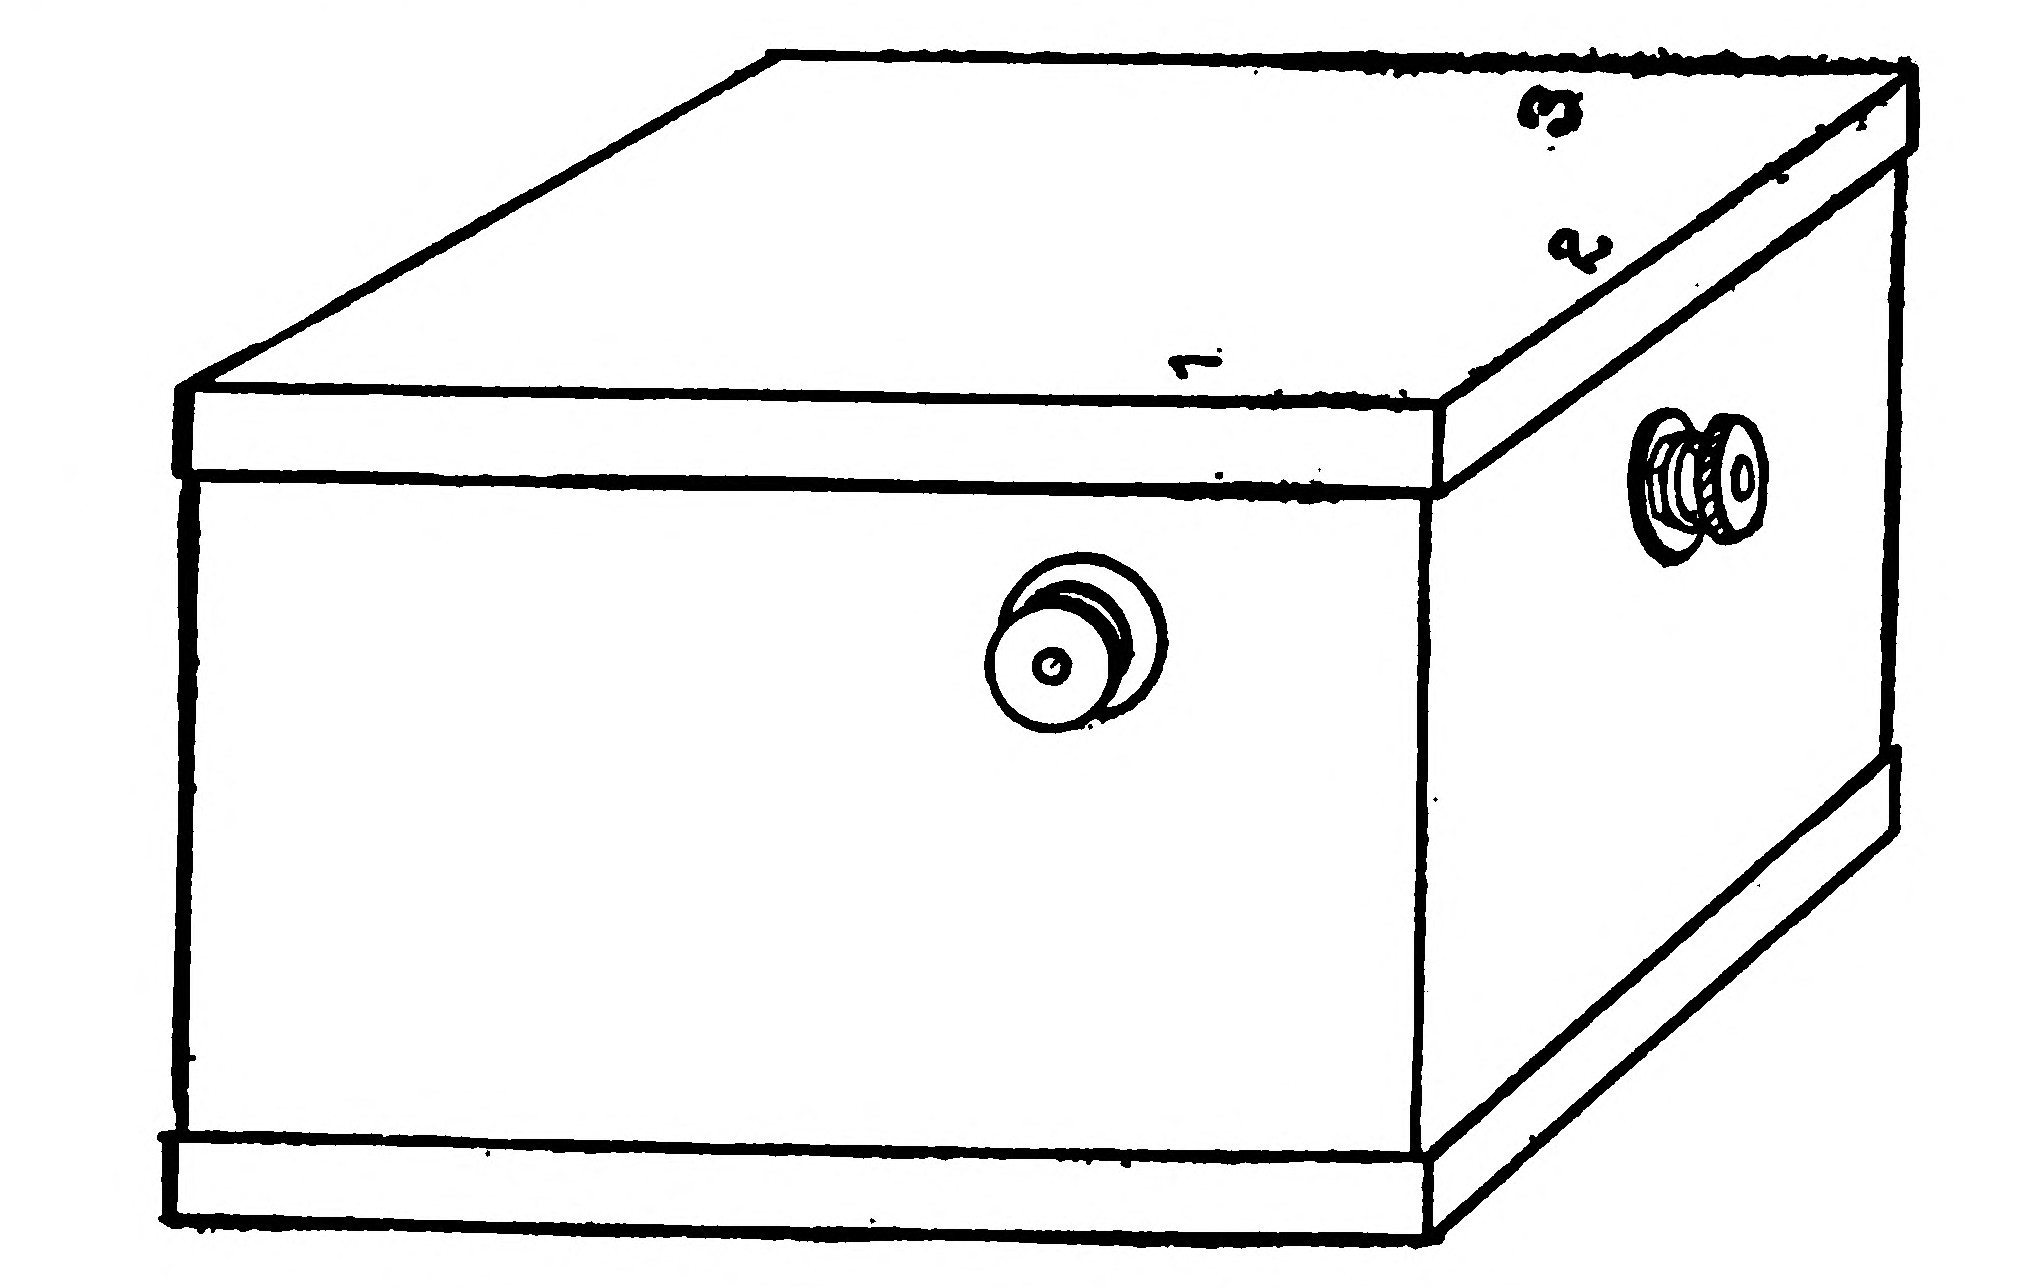 FIG. 66.—The completed Transformer.